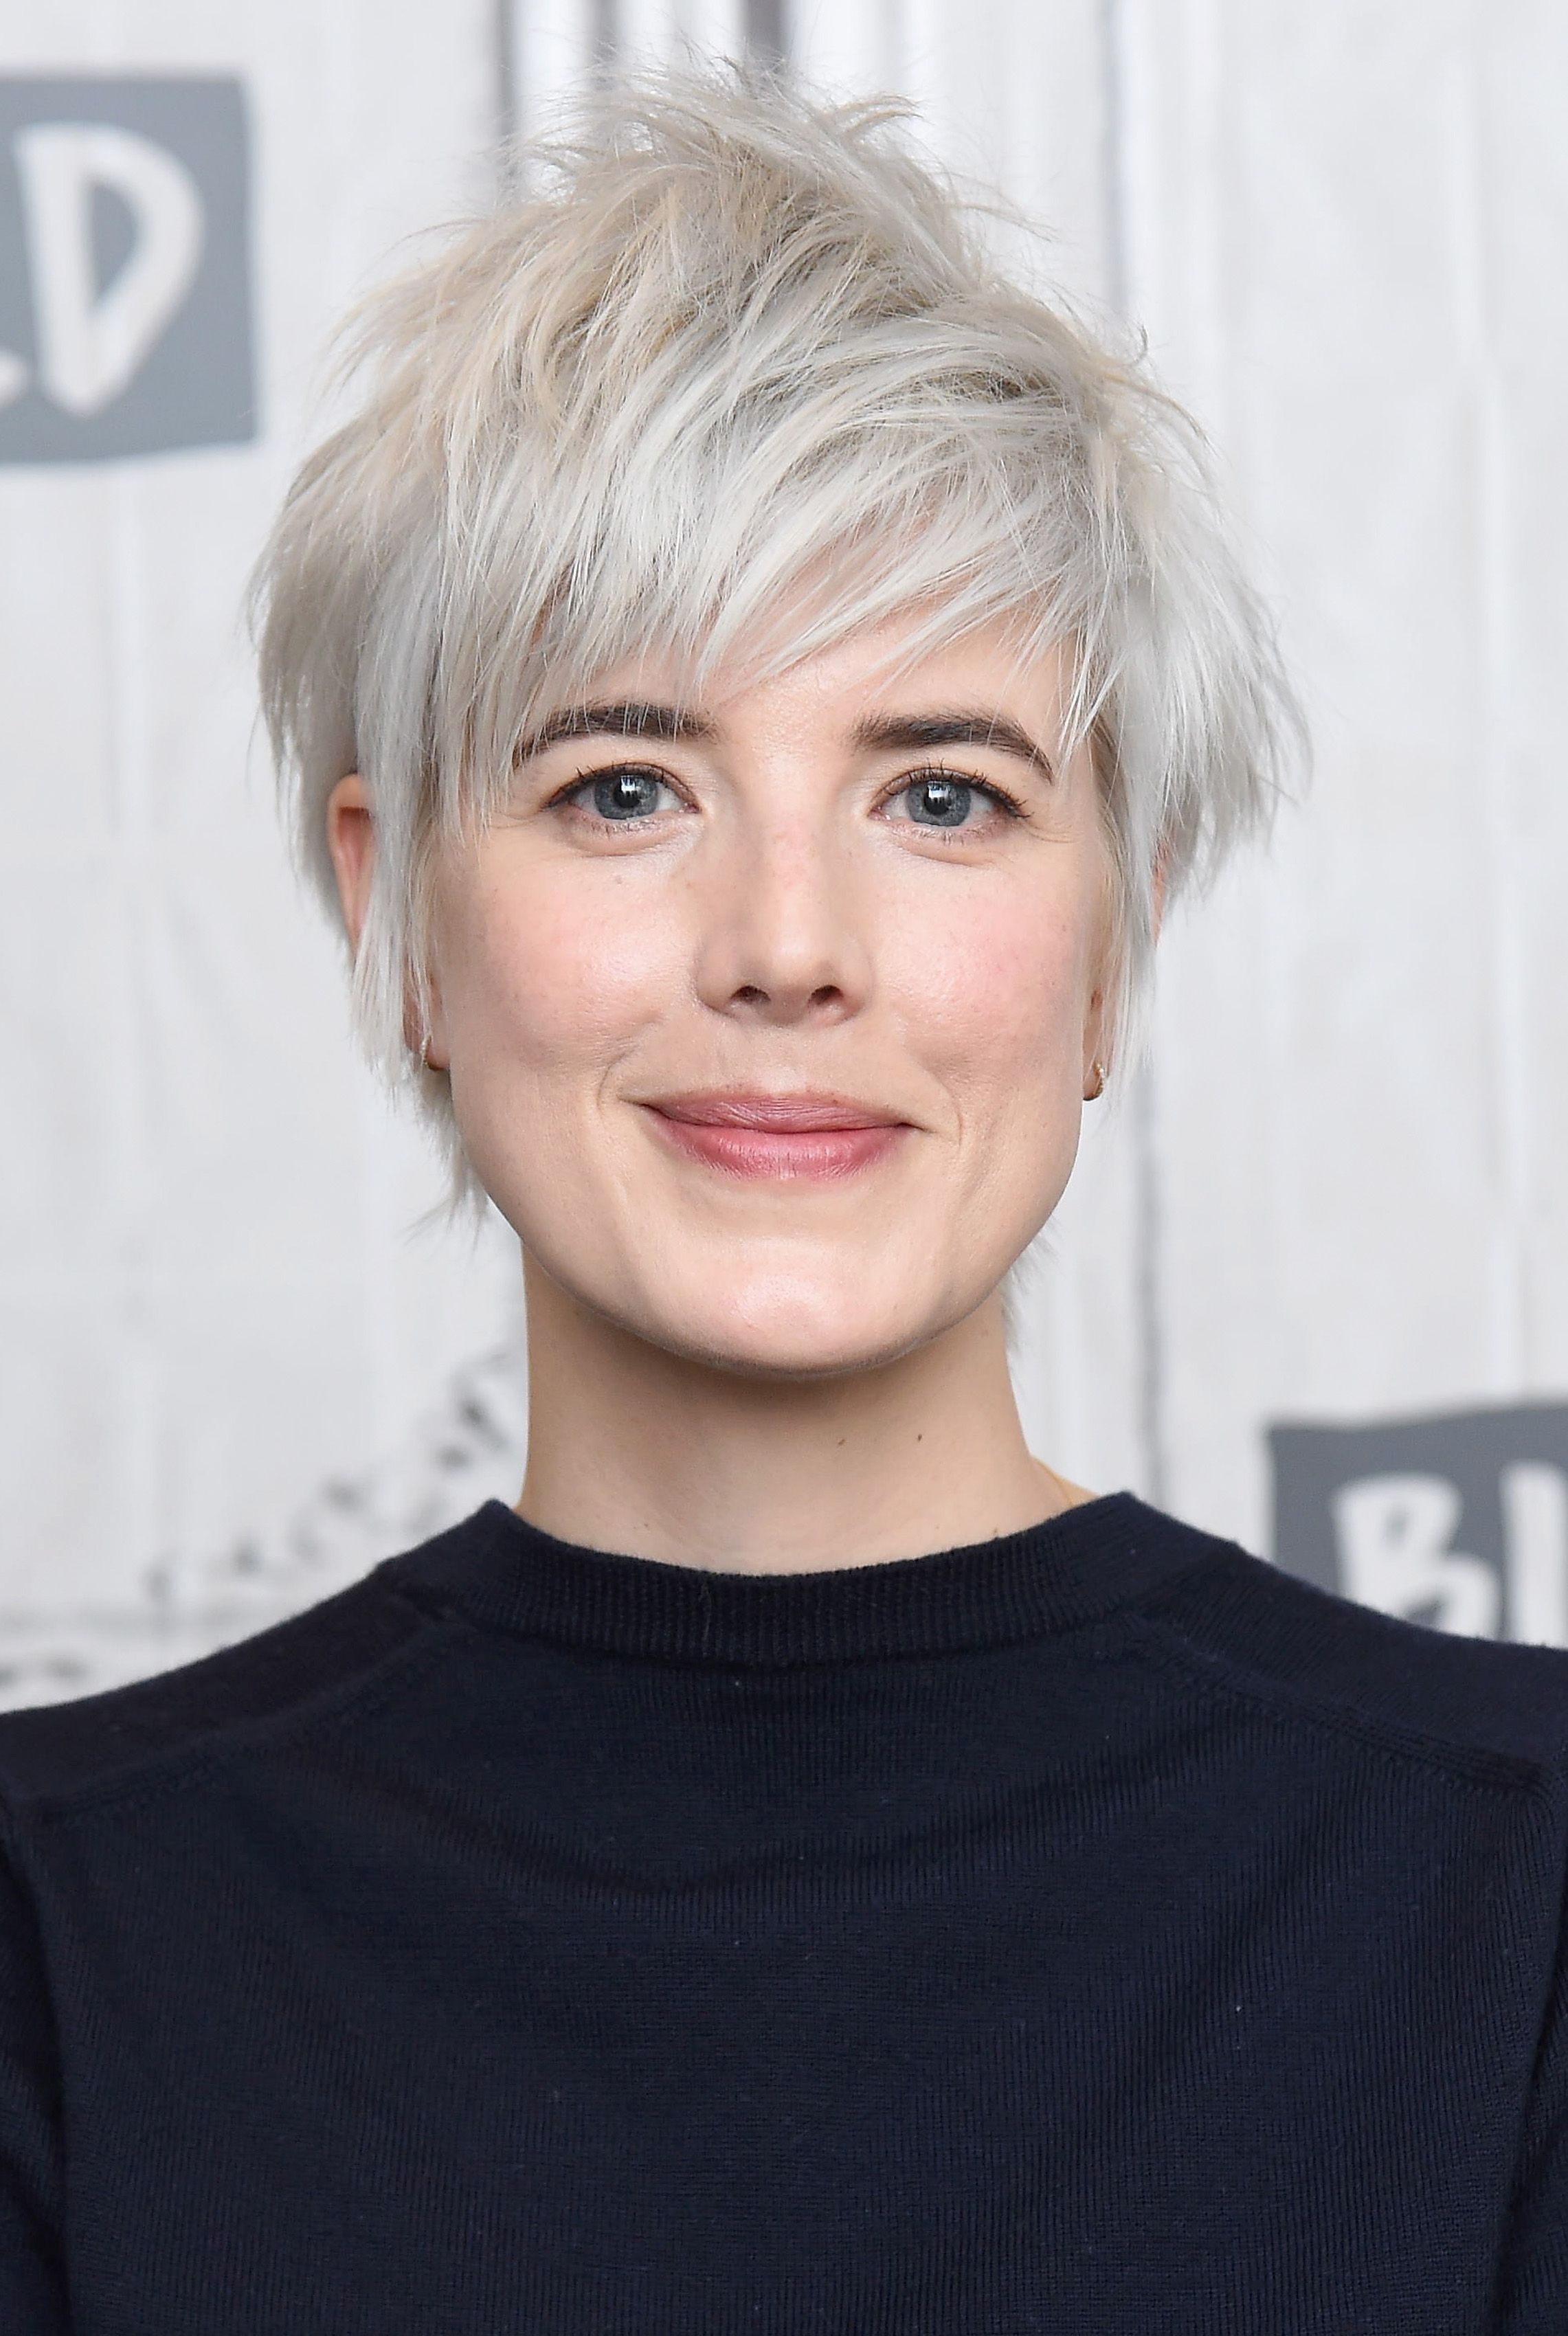 2282px x 3400px - 112 Best Short Hairstyles, Haircuts, and Short Hair Ideas ...